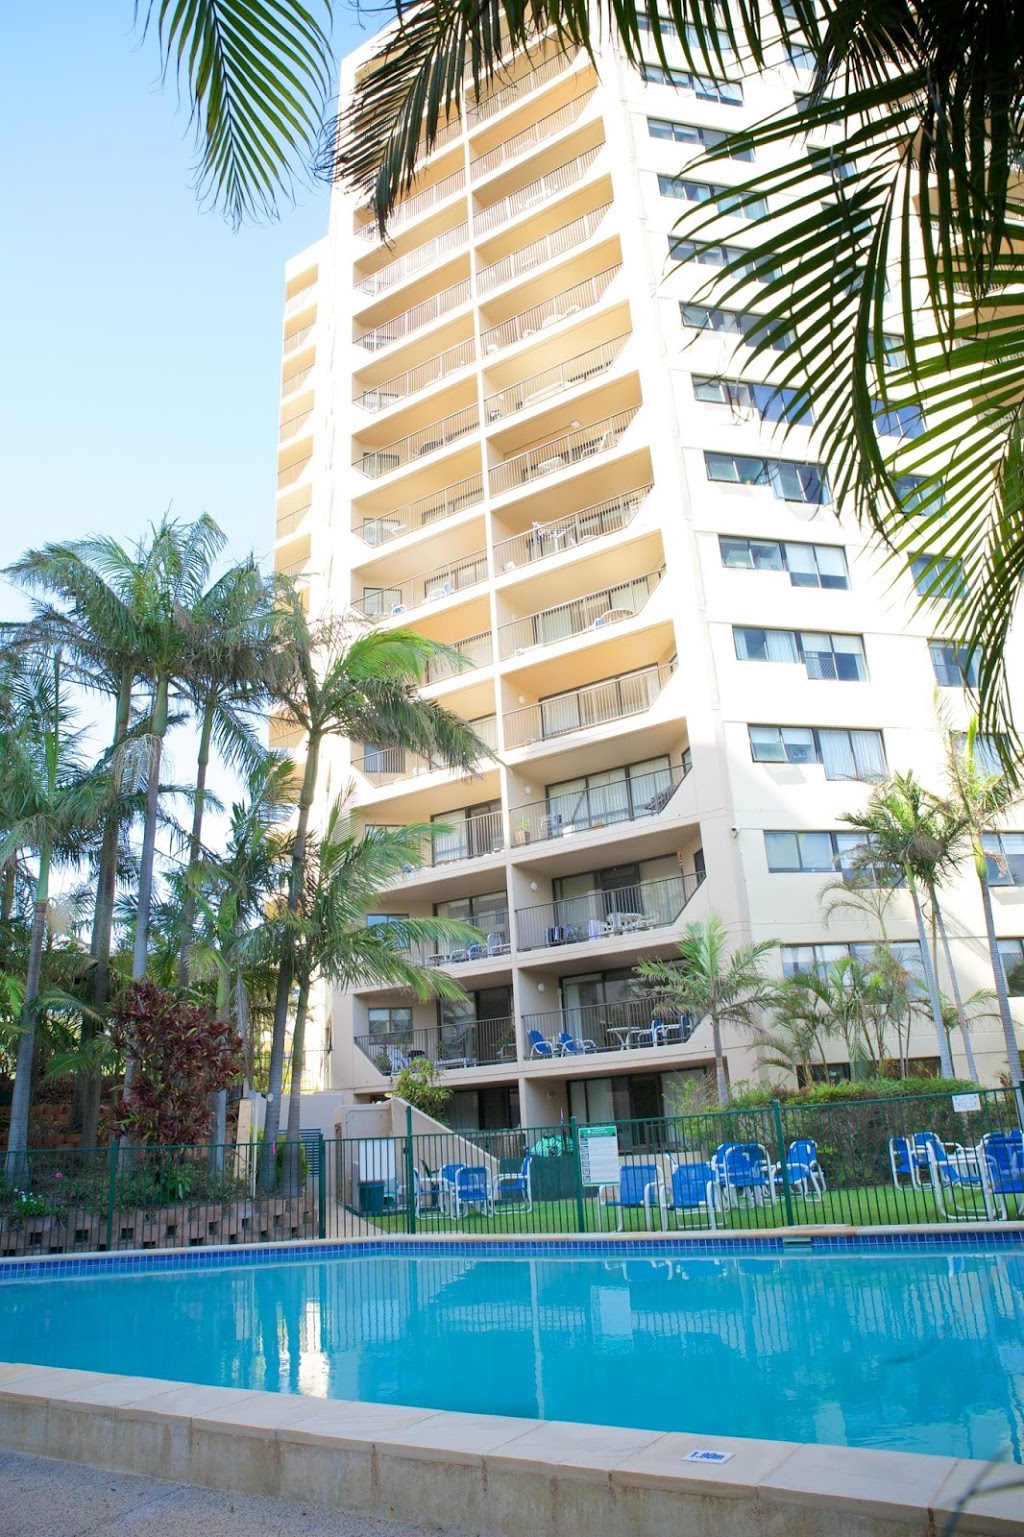 Horizons Holiday Apartments | lodging | 1945 Gold Coast Hwy, Burleigh Heads QLD 4220, Australia | 0755356088 OR +61 7 5535 6088